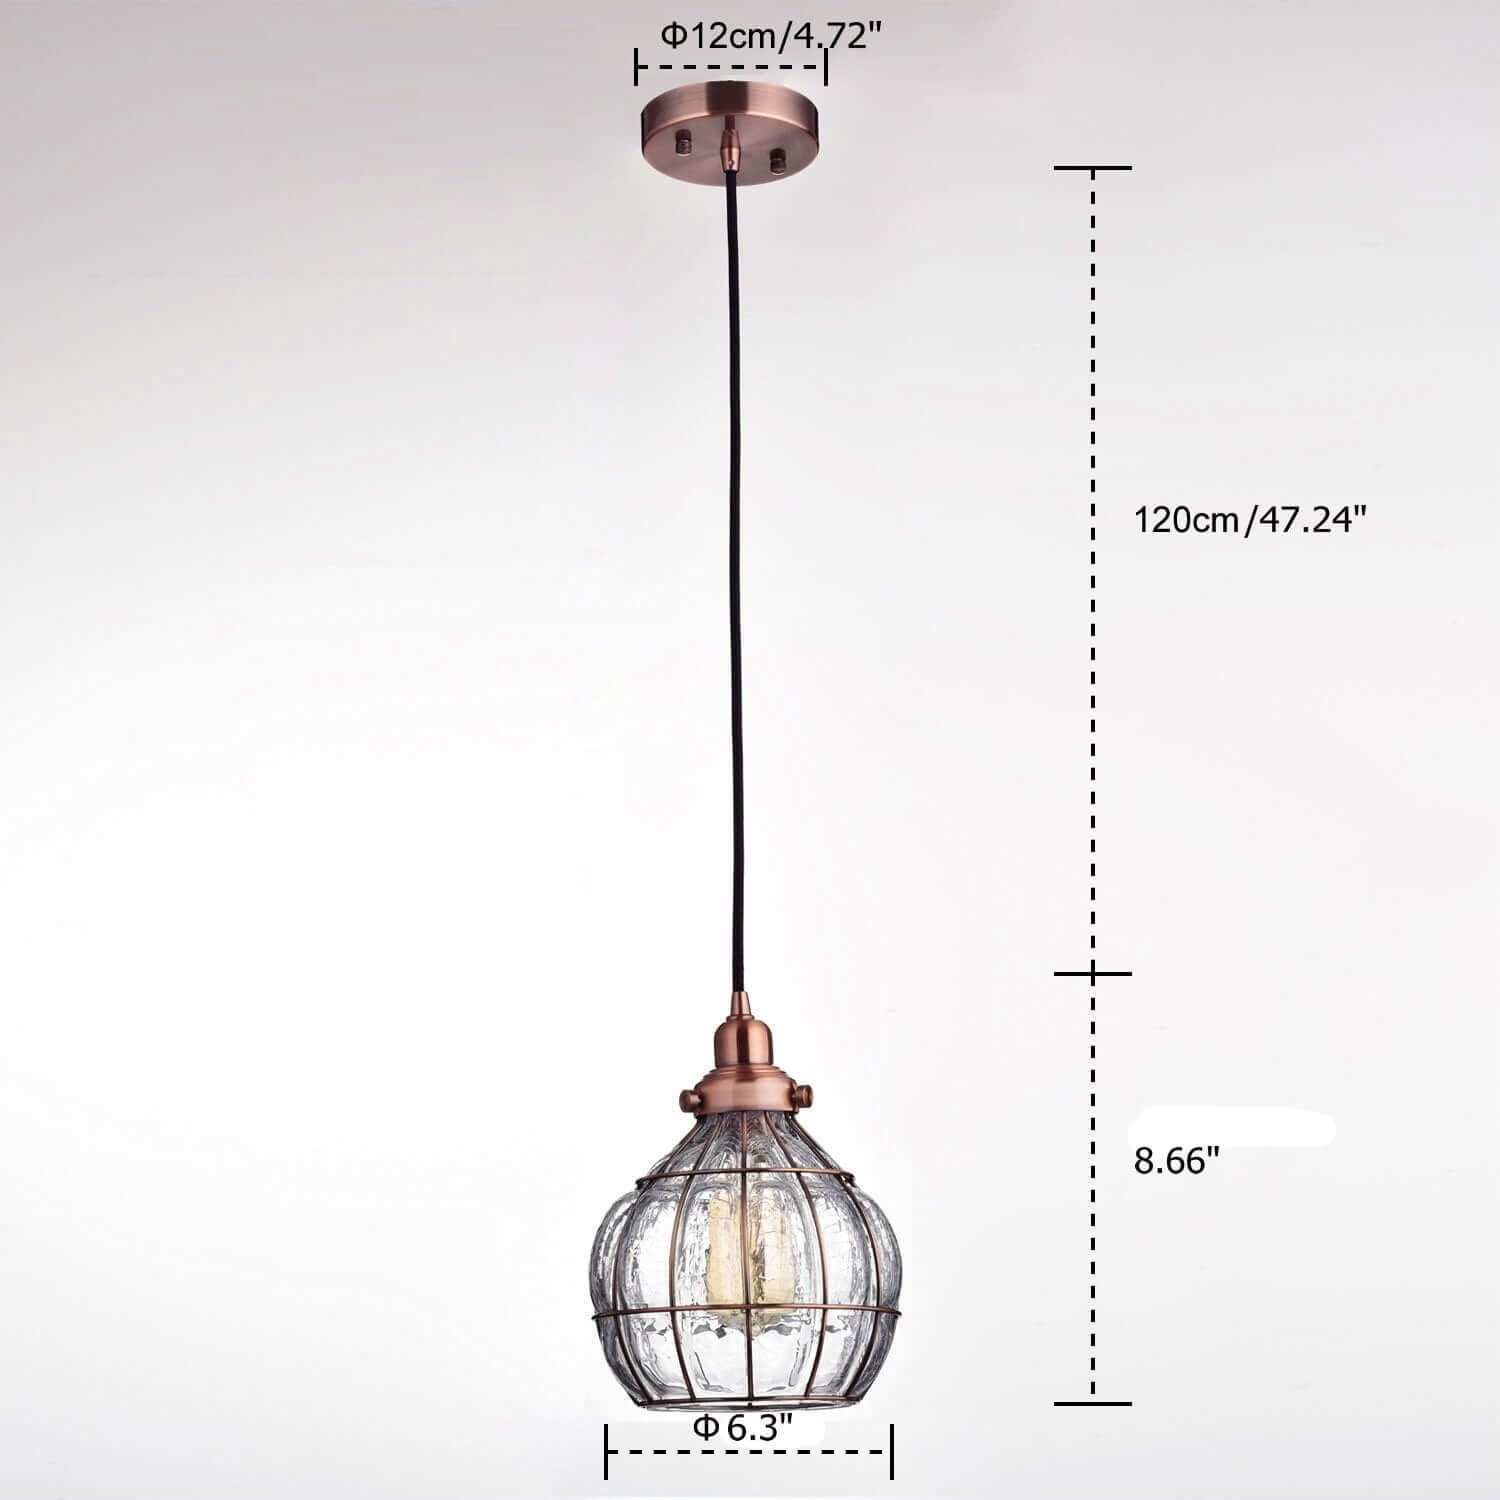 Rustic Cracked Glass Globe Pendant Lights, Red Copper Finish